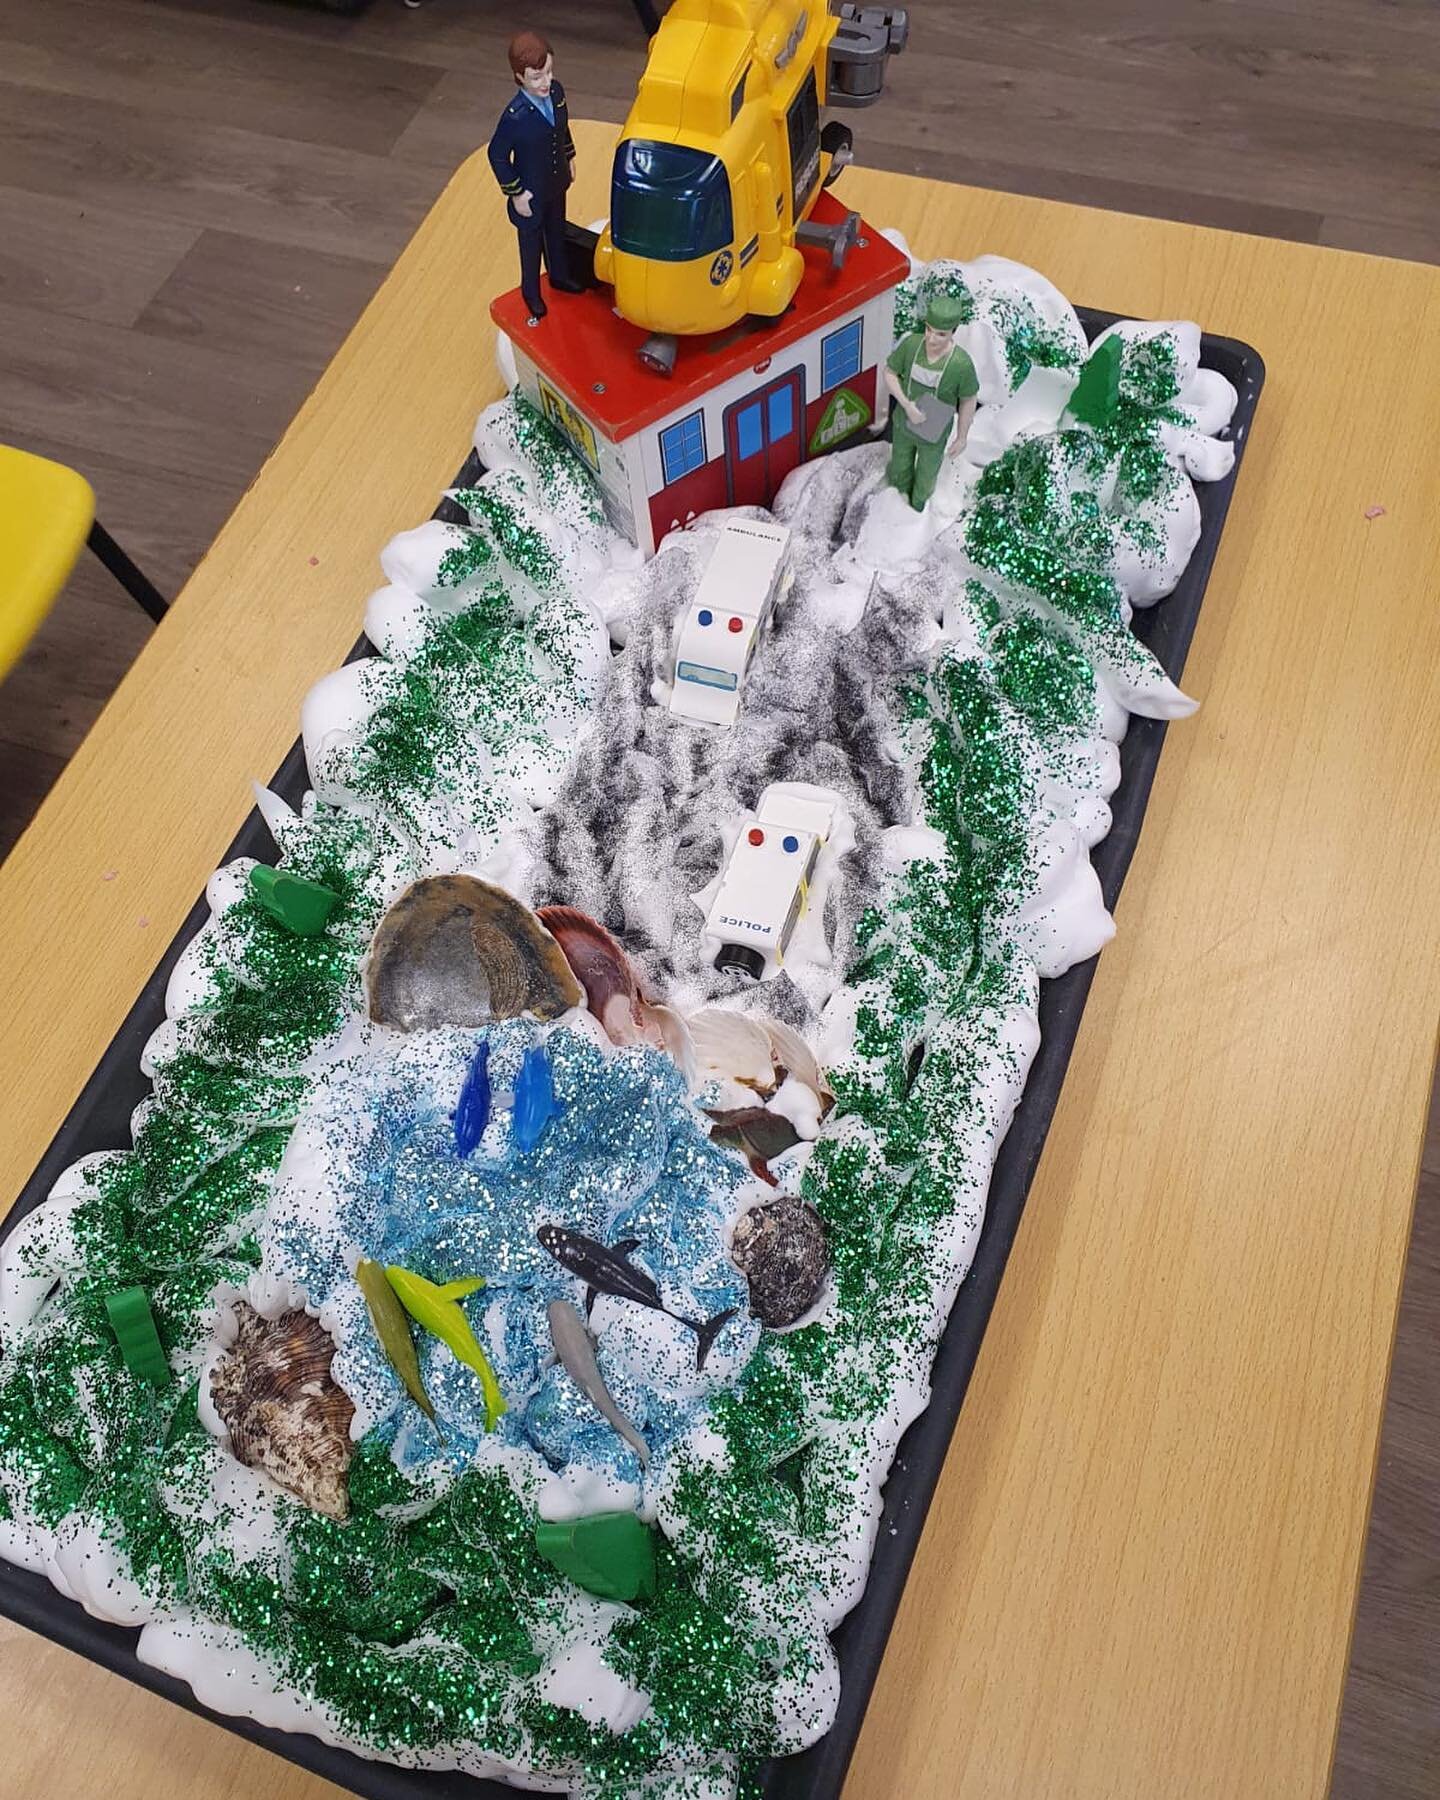 Sometimes the quality and creativity of the team amazes me! The dedication to craft something so enticing and exciting for the children to enjoy is outstanding! They loved it! 

#leapfrogdaynursery #babyroom #softplay #nursery #croydon #daycare #pres